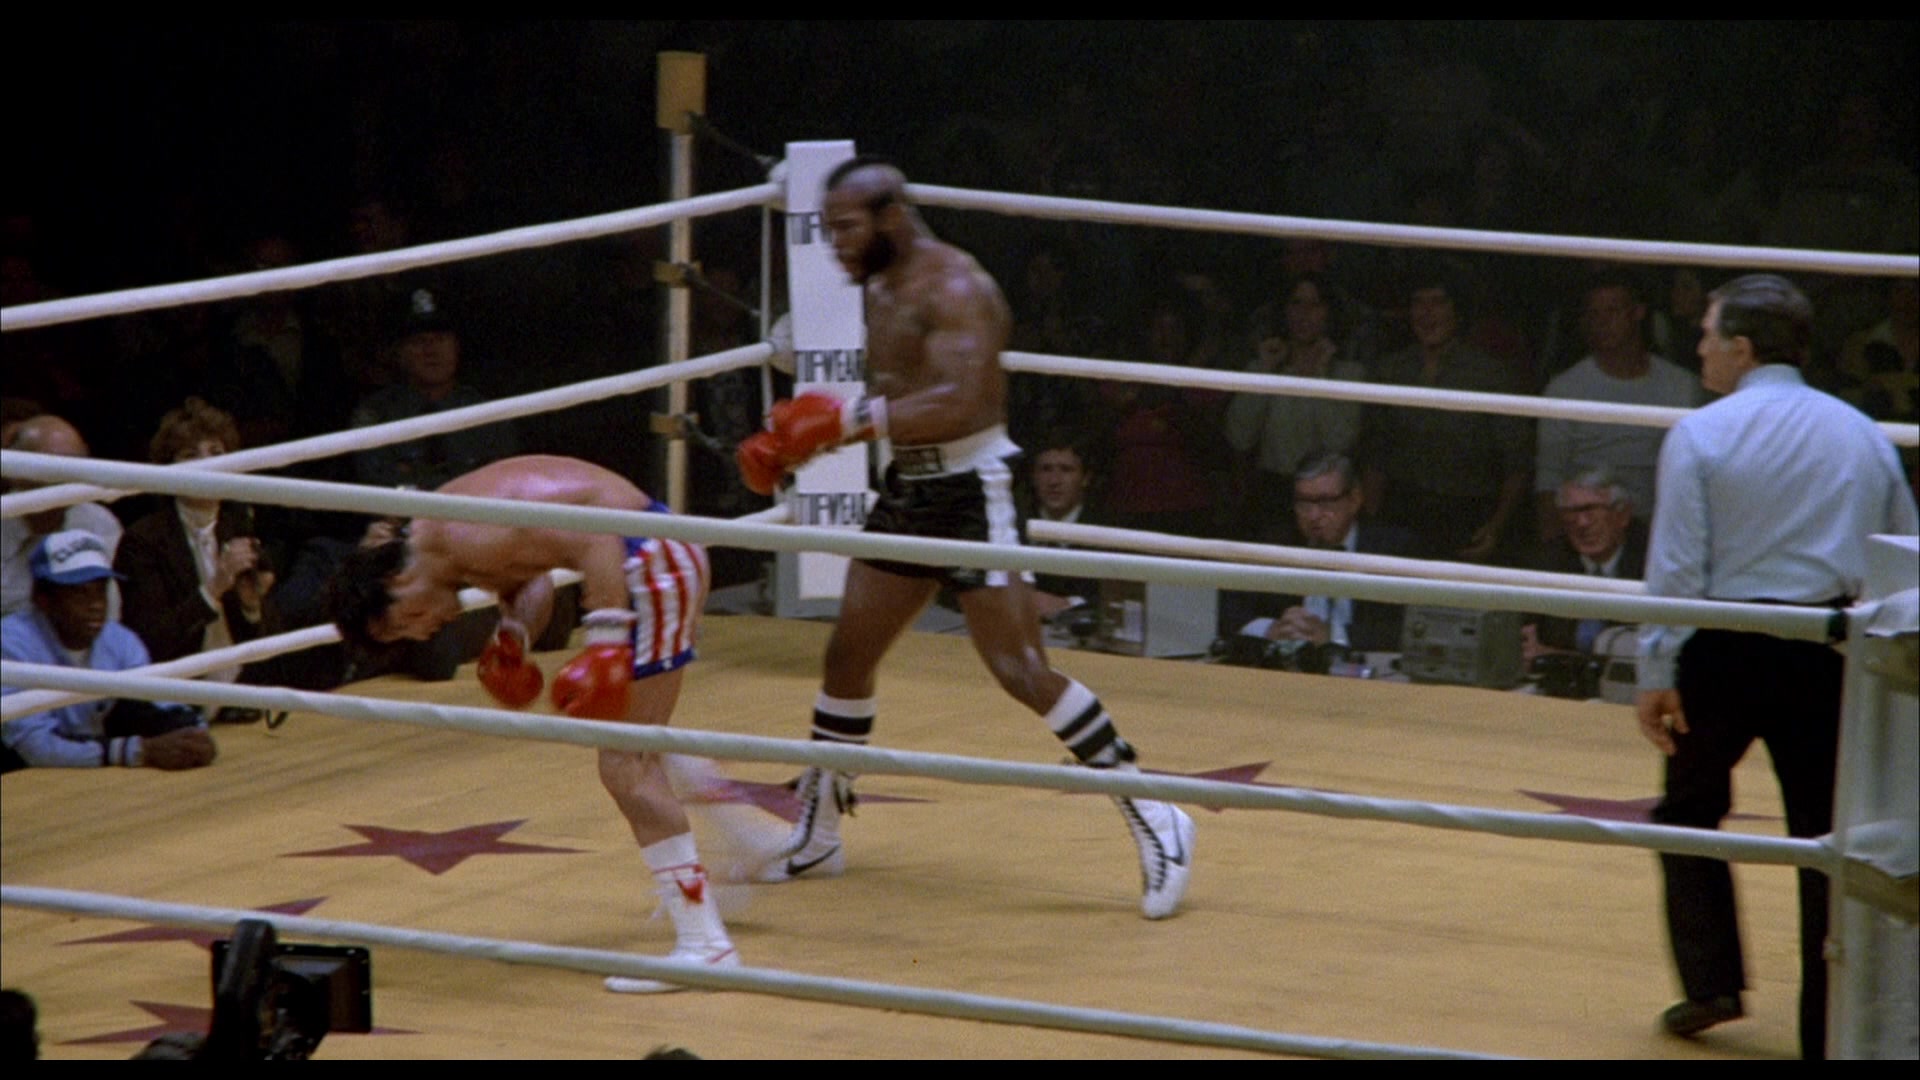 Nike Boxing Shoes Worn by Mr. T (Clubber Lang) in Rocky 3 (1982) Movie1920 x 1080